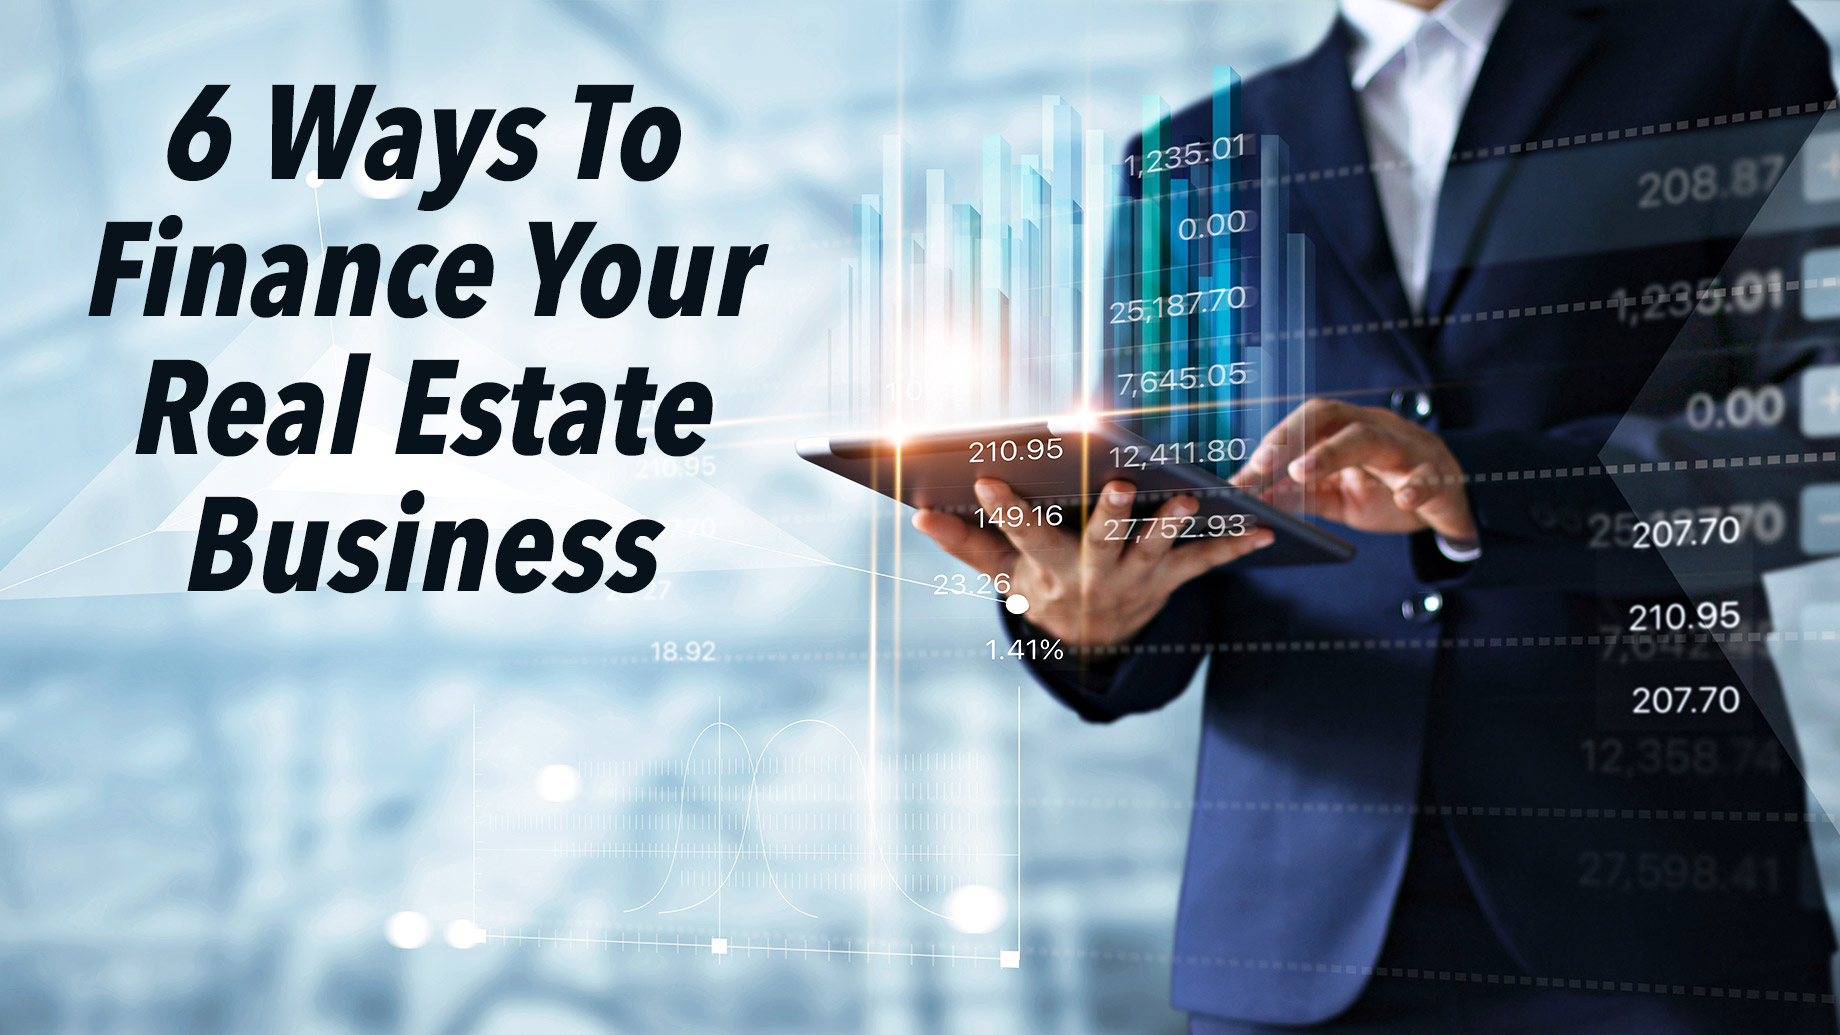 6 Ways To Finance Your Real Estate Business